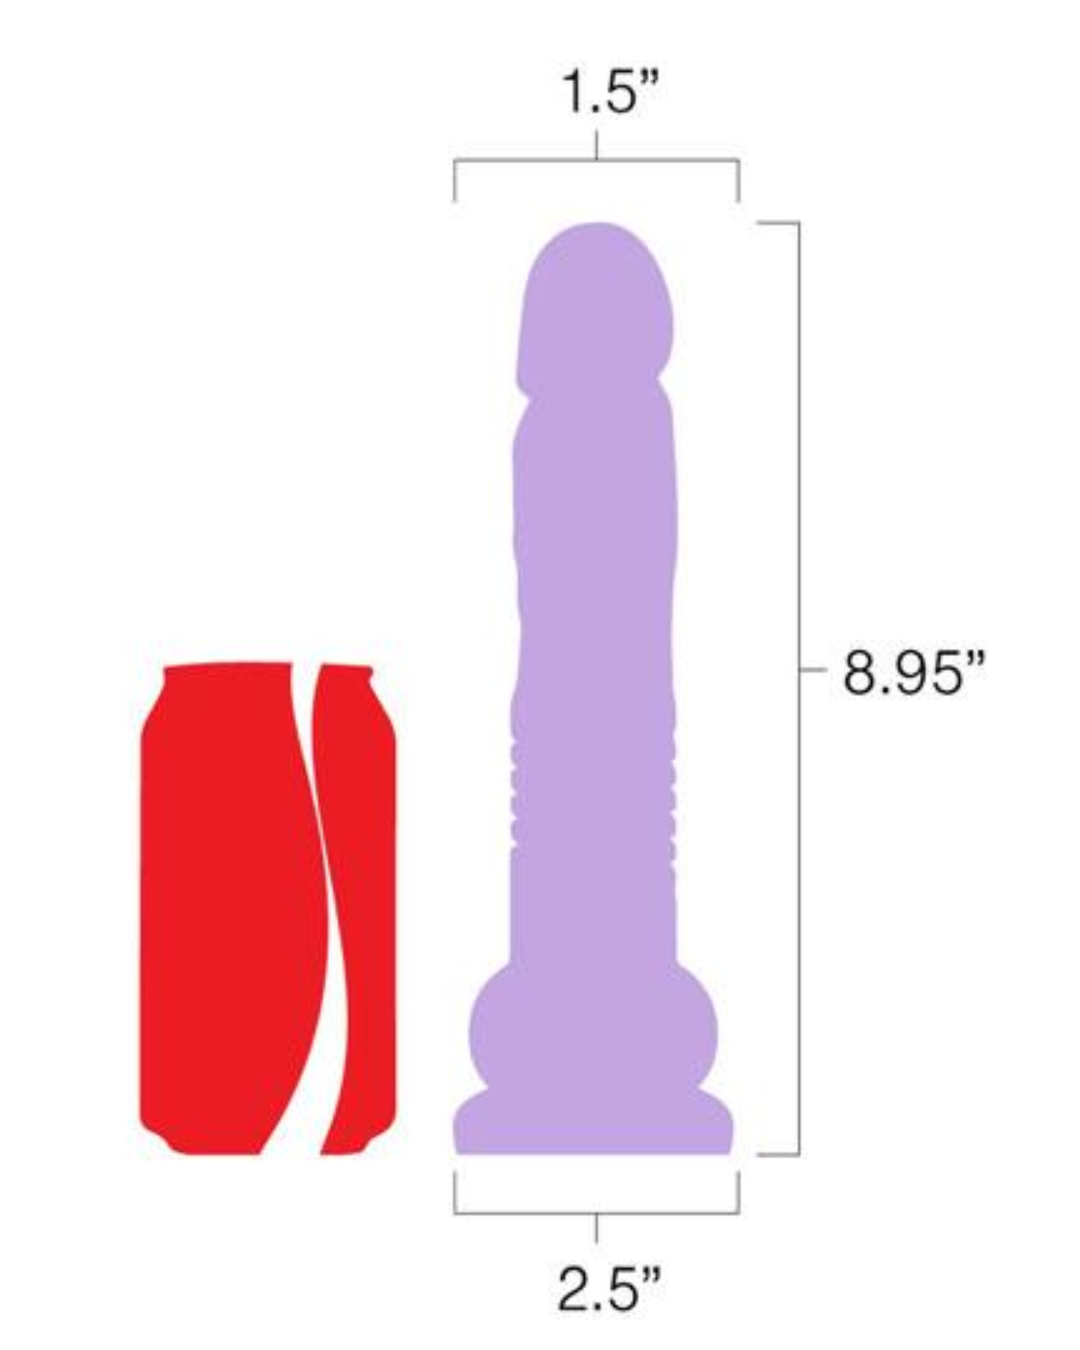 The Thruster Mini Teddy Powerful Thrusting Silicone Dildo - Mint Green with soda can for scale